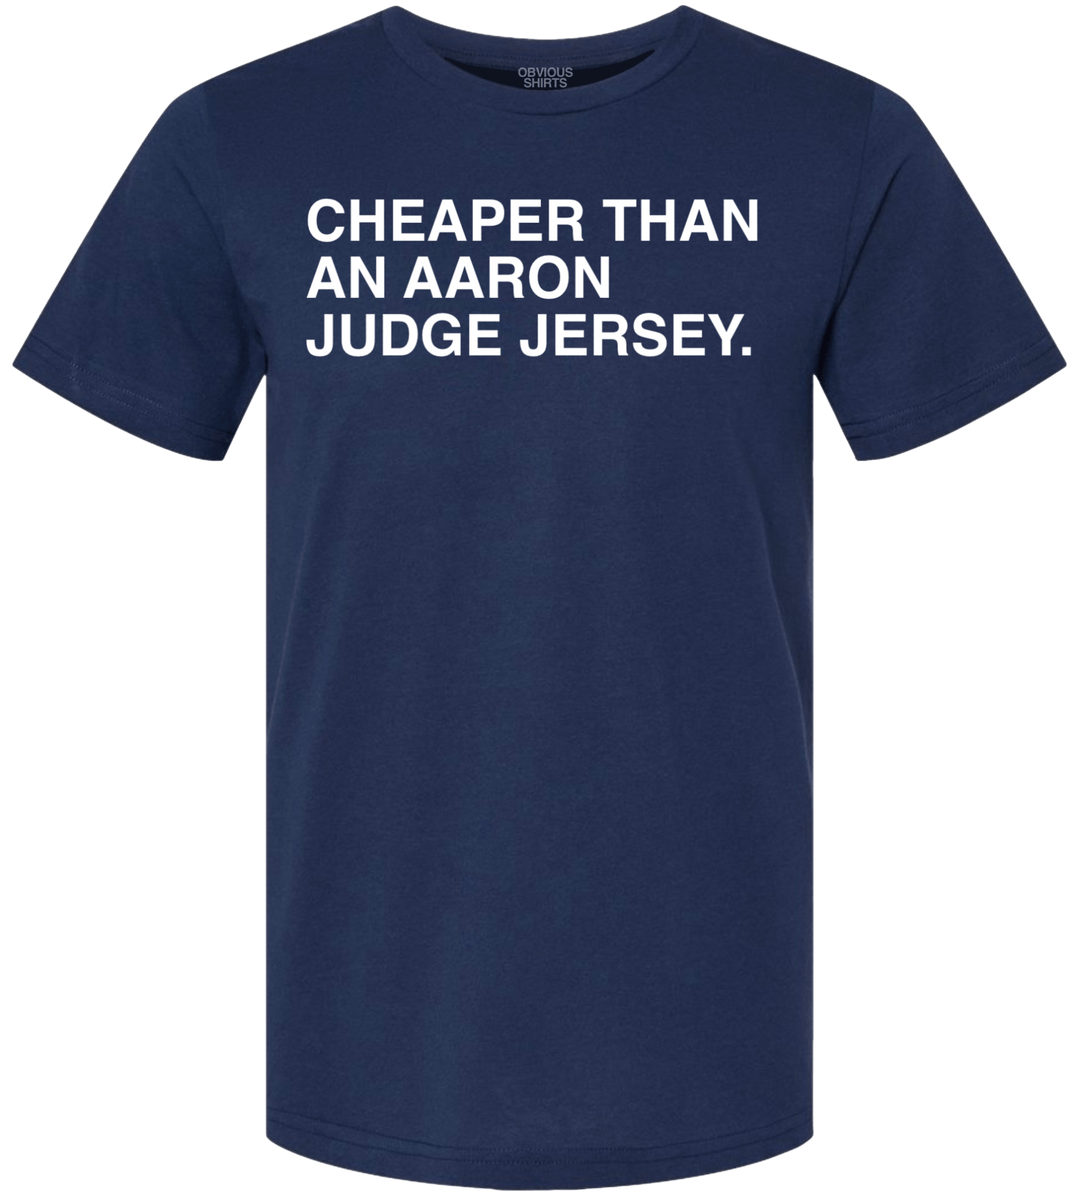 CHEAPER THAN AN AARON JUDGE JERSEY. - OBVIOUS SHIRTS